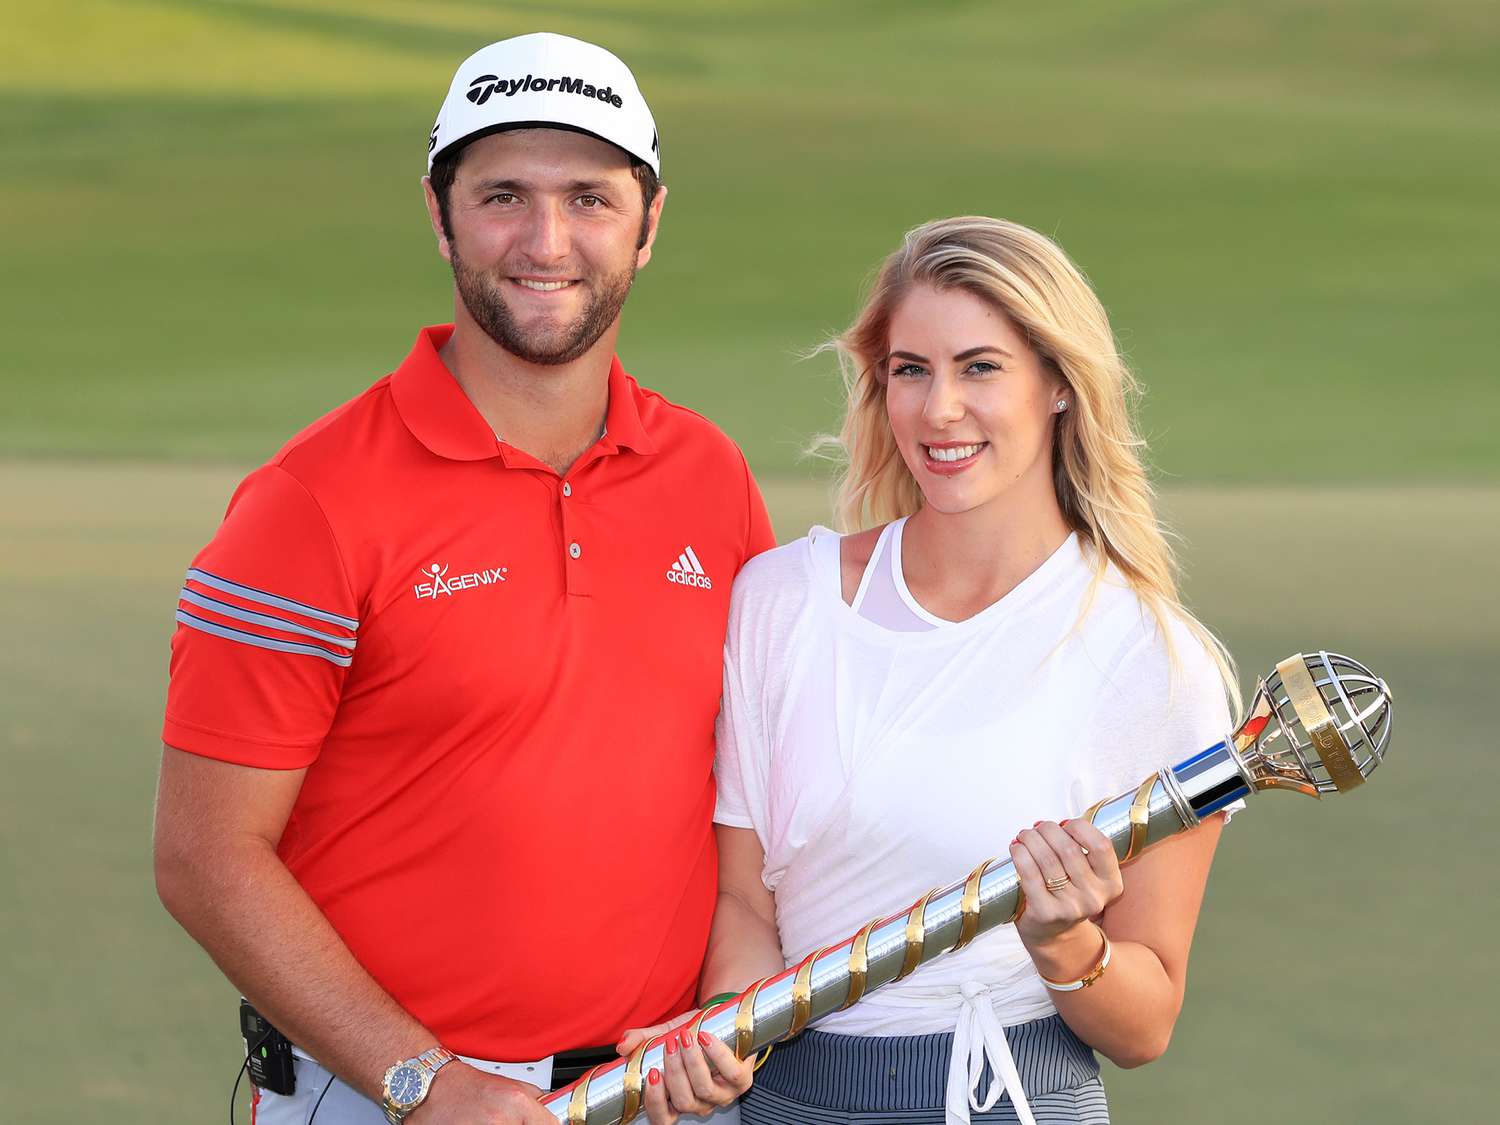 Who Is Jon Rahm Wife, What Does She Do?